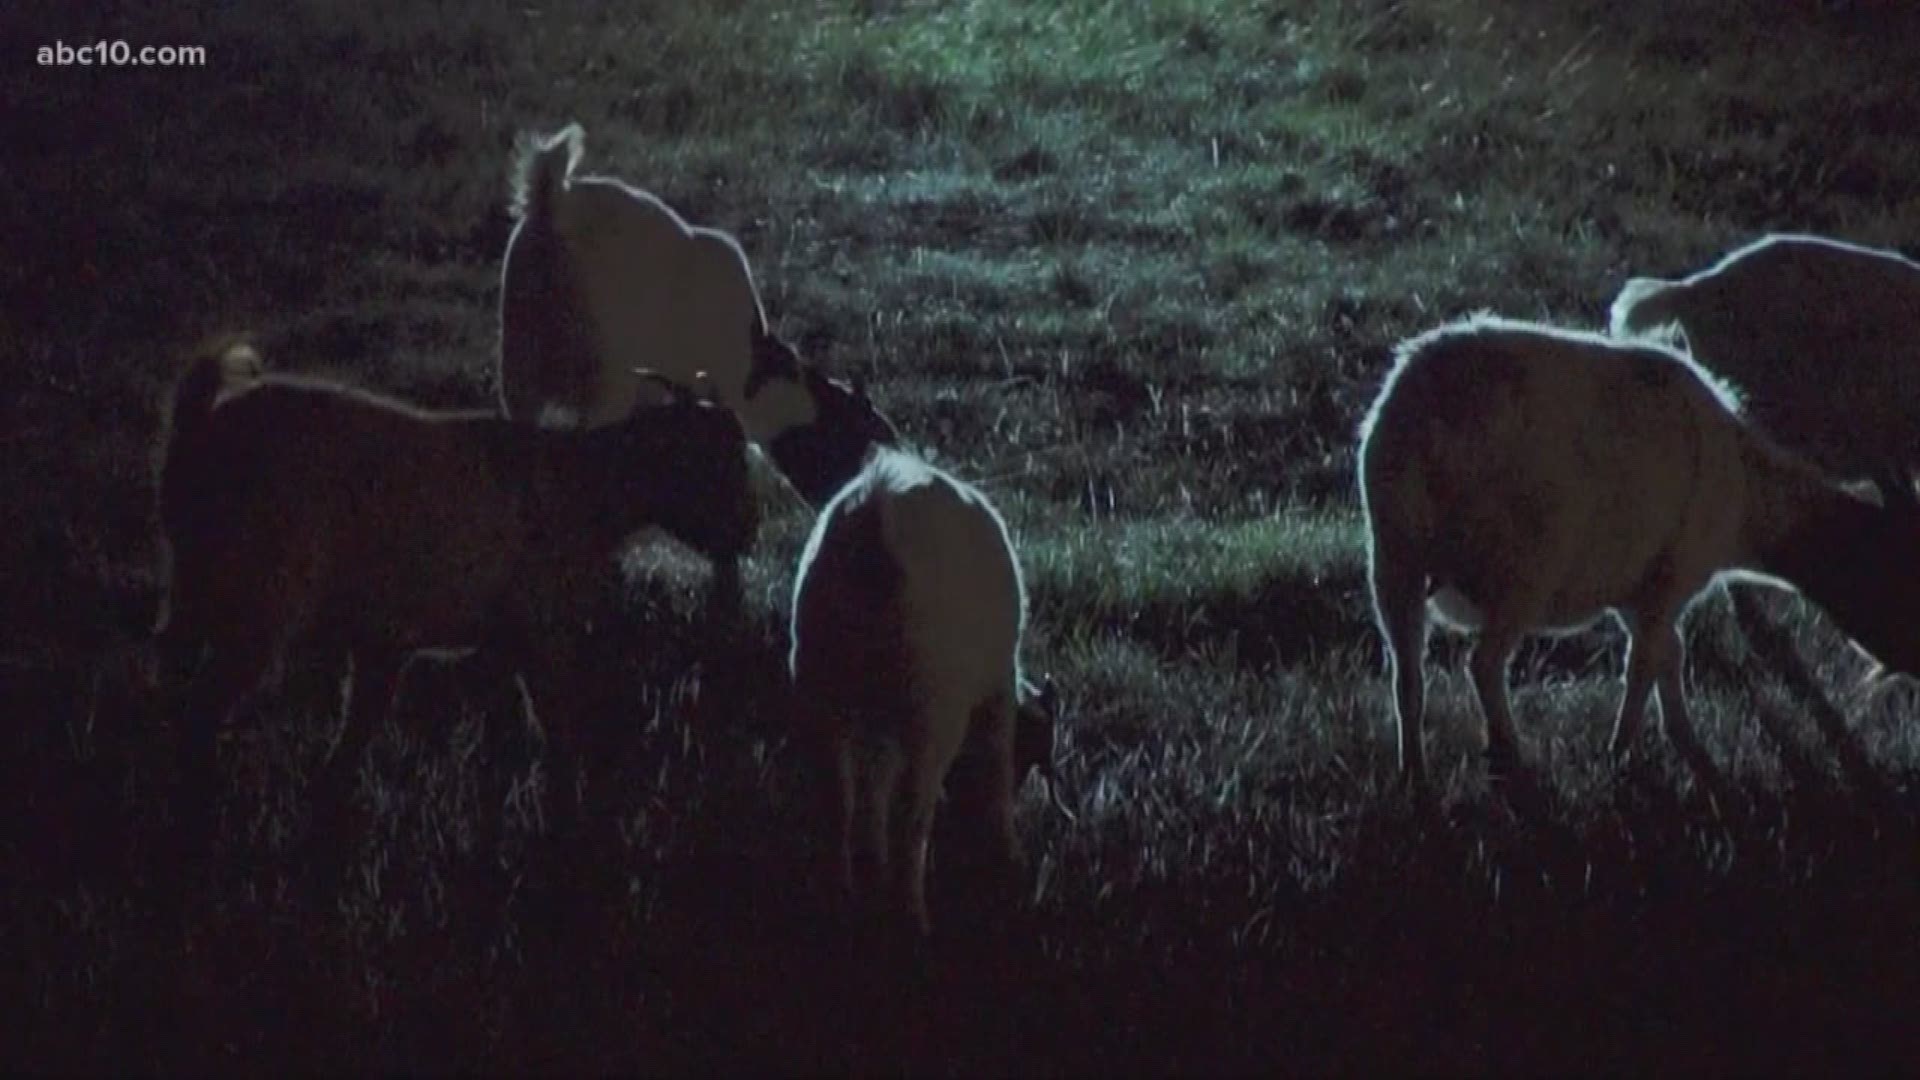 Highway 65 near Lincoln was briefly shut down, Tuesday night, after dozens of goats wandered onto the roadway. Sadly, authorities say five of the goats were struck by cars and killed before officers arrived on the scene.